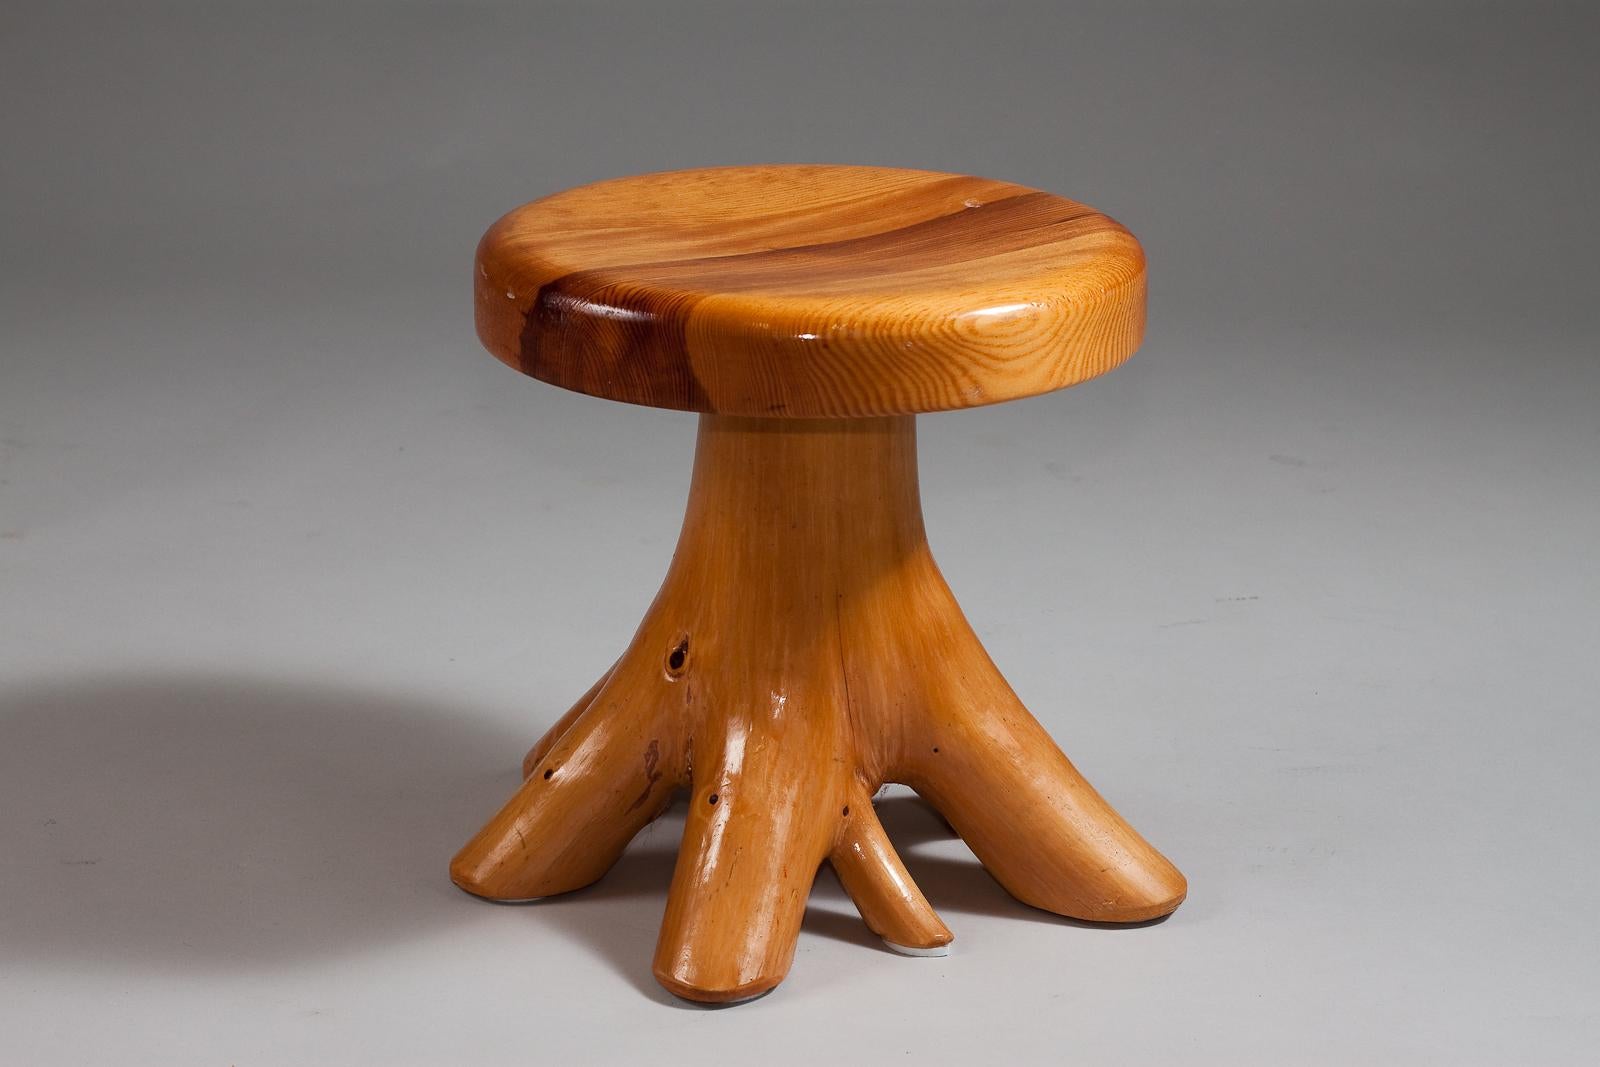 Introduce the product: Add a touch of nostalgia and whimsy to your child's room with this vintage Finnish c. 1960's solid pine branch stool. This adorable piece is the perfect blend of mid-century modern design and Scandinavian charm.

Material and